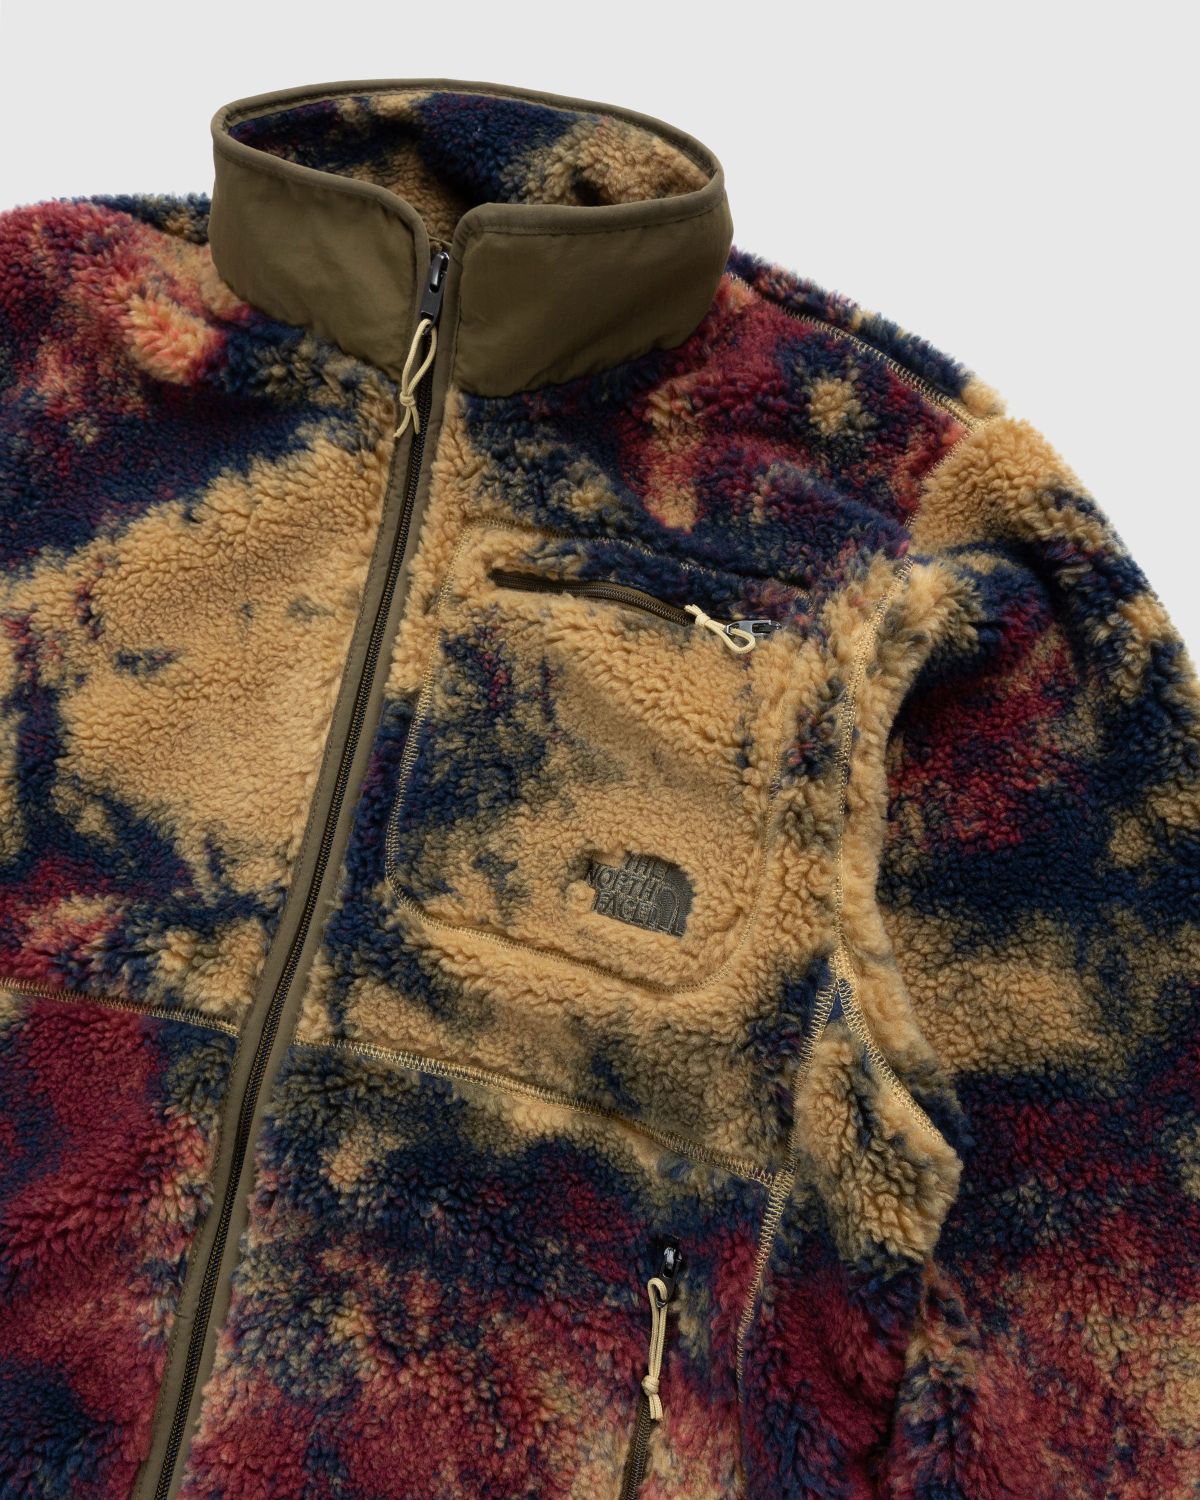 The North Face Extreme Pile Full Zip Jacket in Tan Jacquard print-Brown